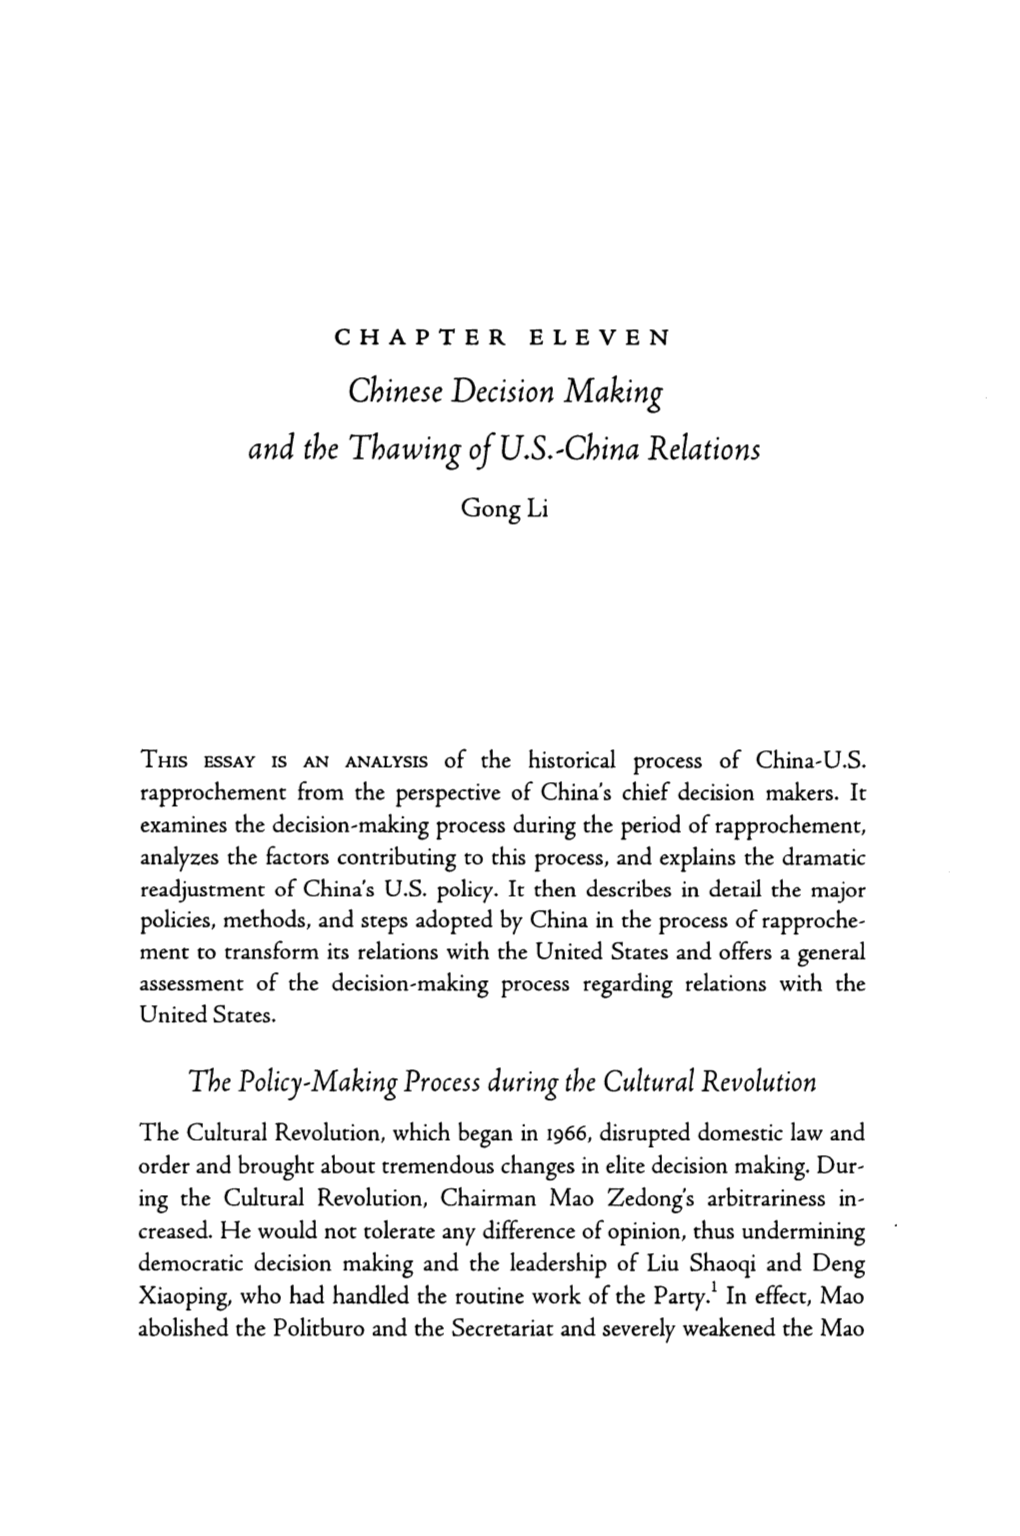 Chinese Decision Making and the Thawing of U.S.~China Relations